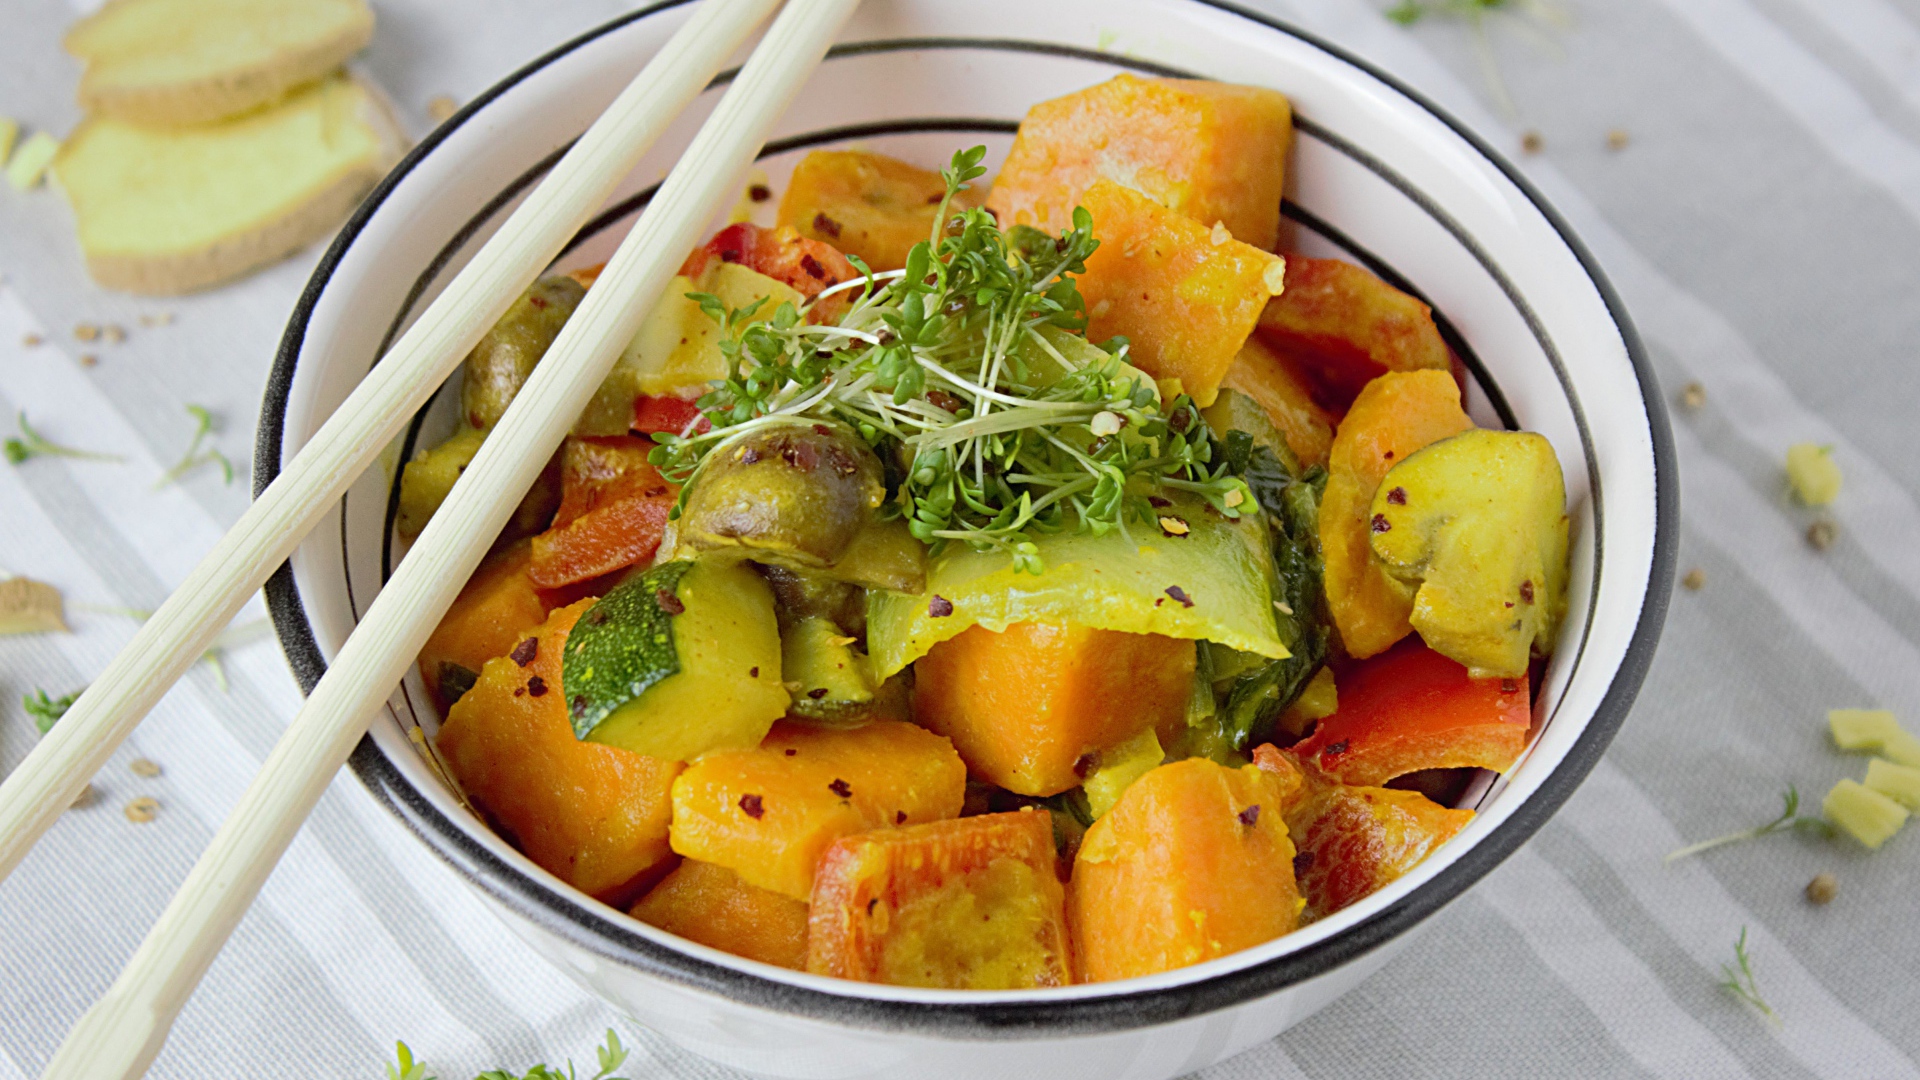 Spicy vegetable dish in a bowl with chopsticks